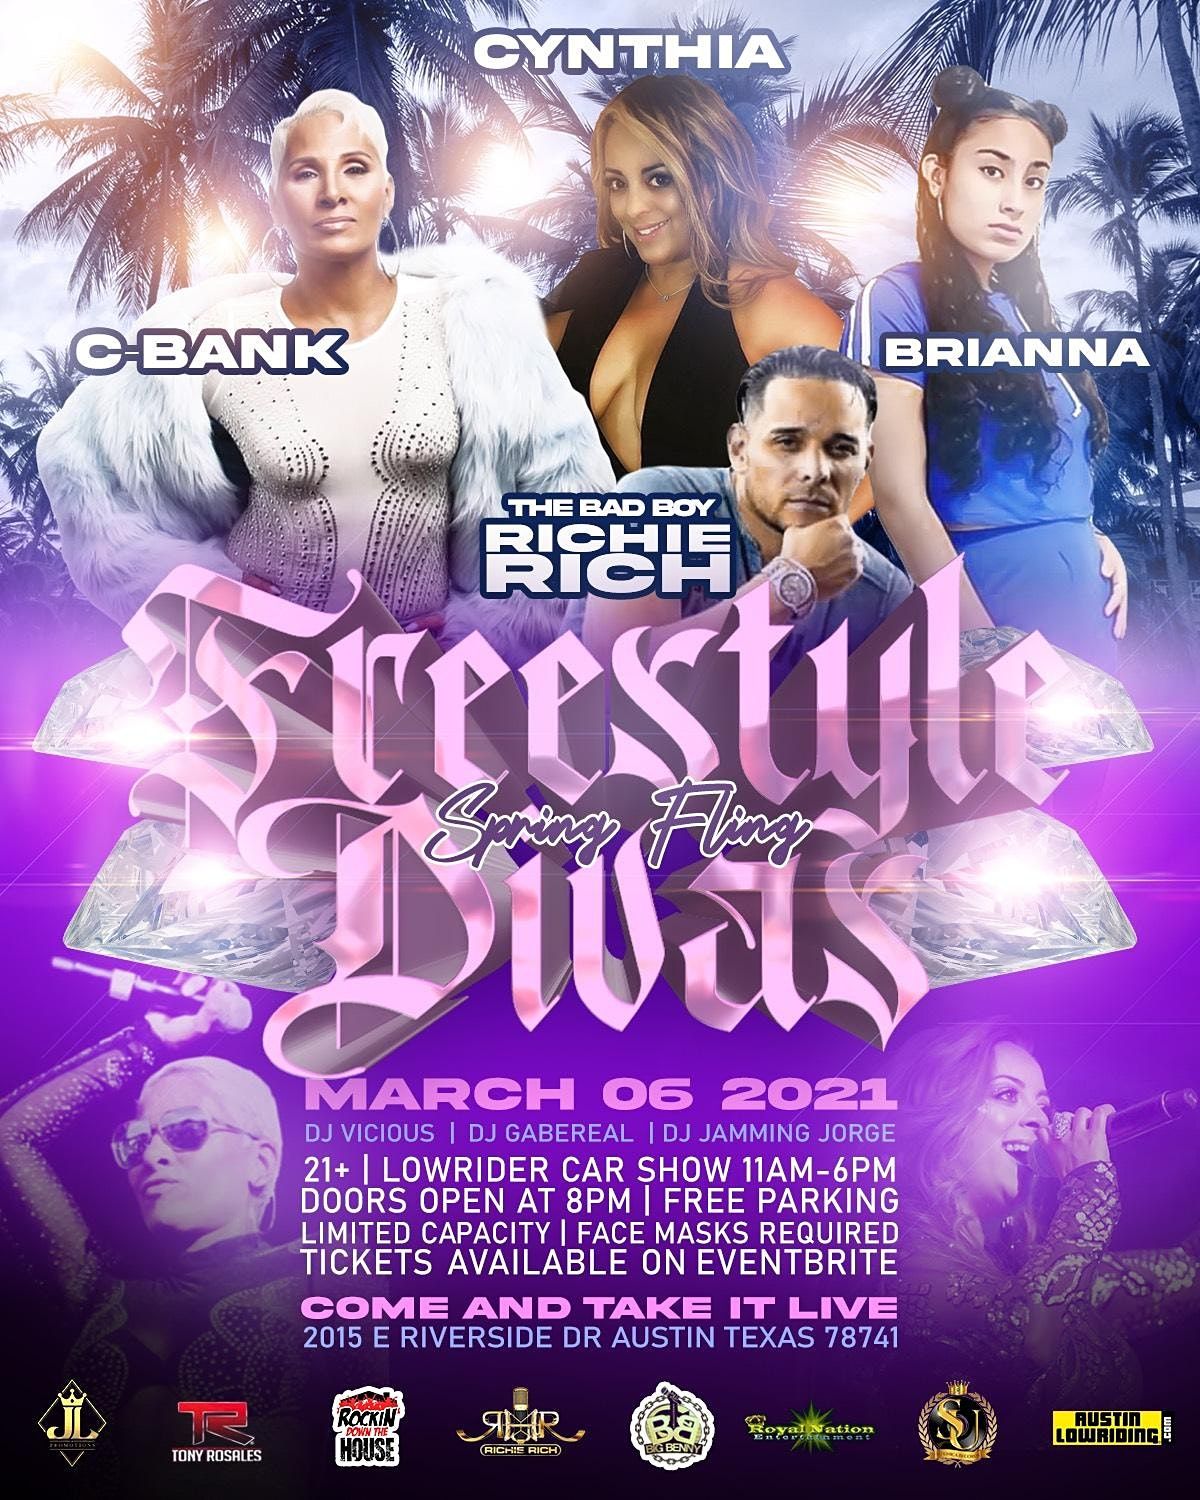 Freestyle Spring Fling Diva Edition Concert FT: Cynthia & C-Bank